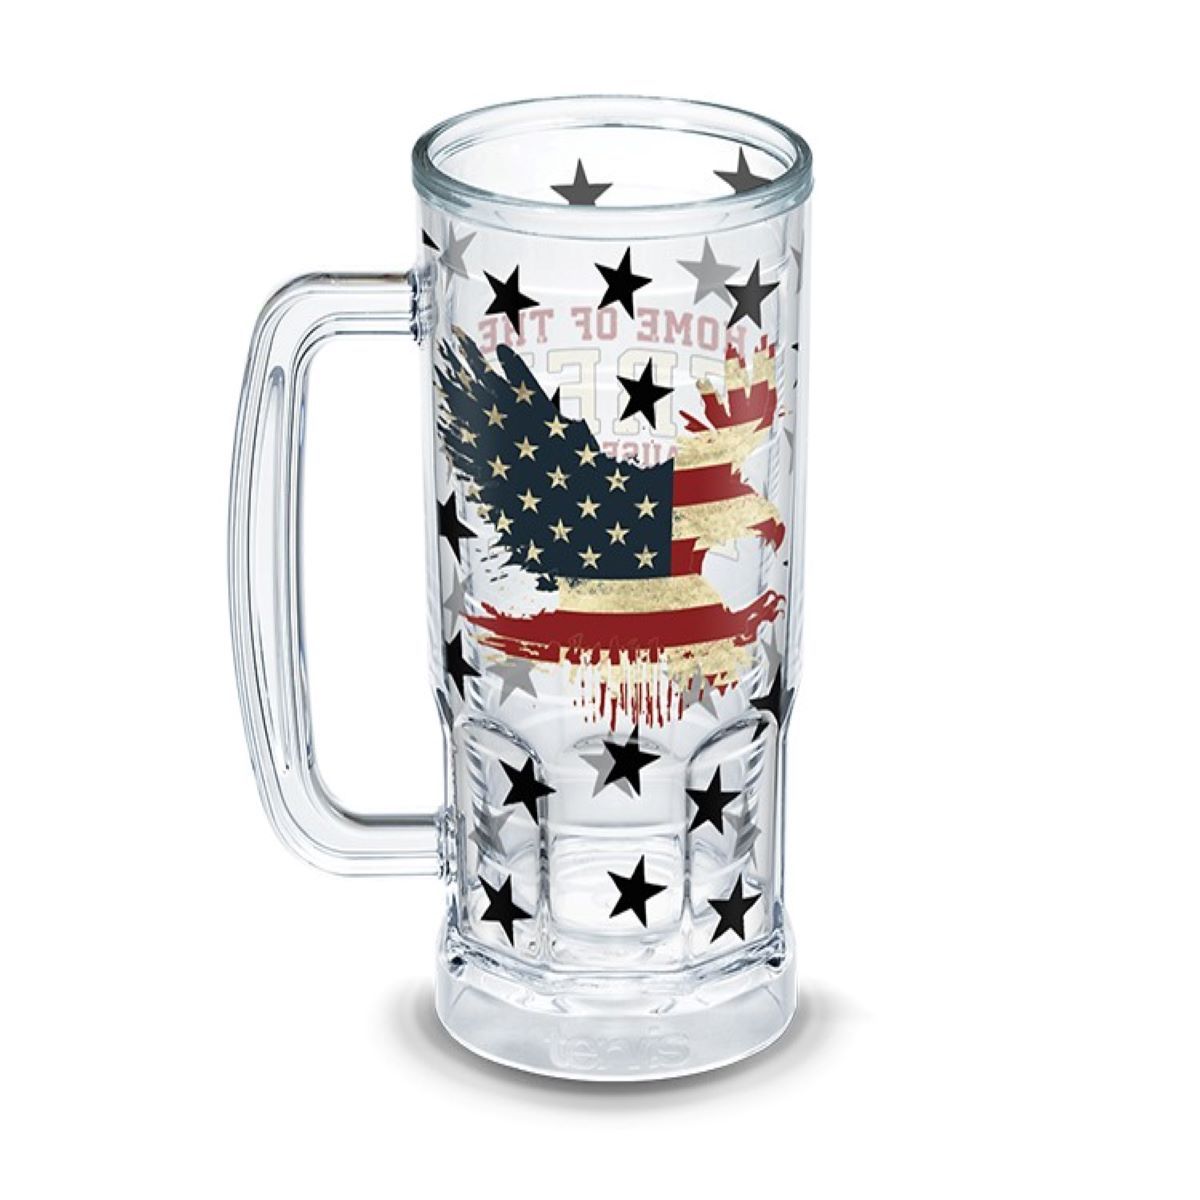 16oz. The Maitlands glass beer cup & straw set – Sour Times